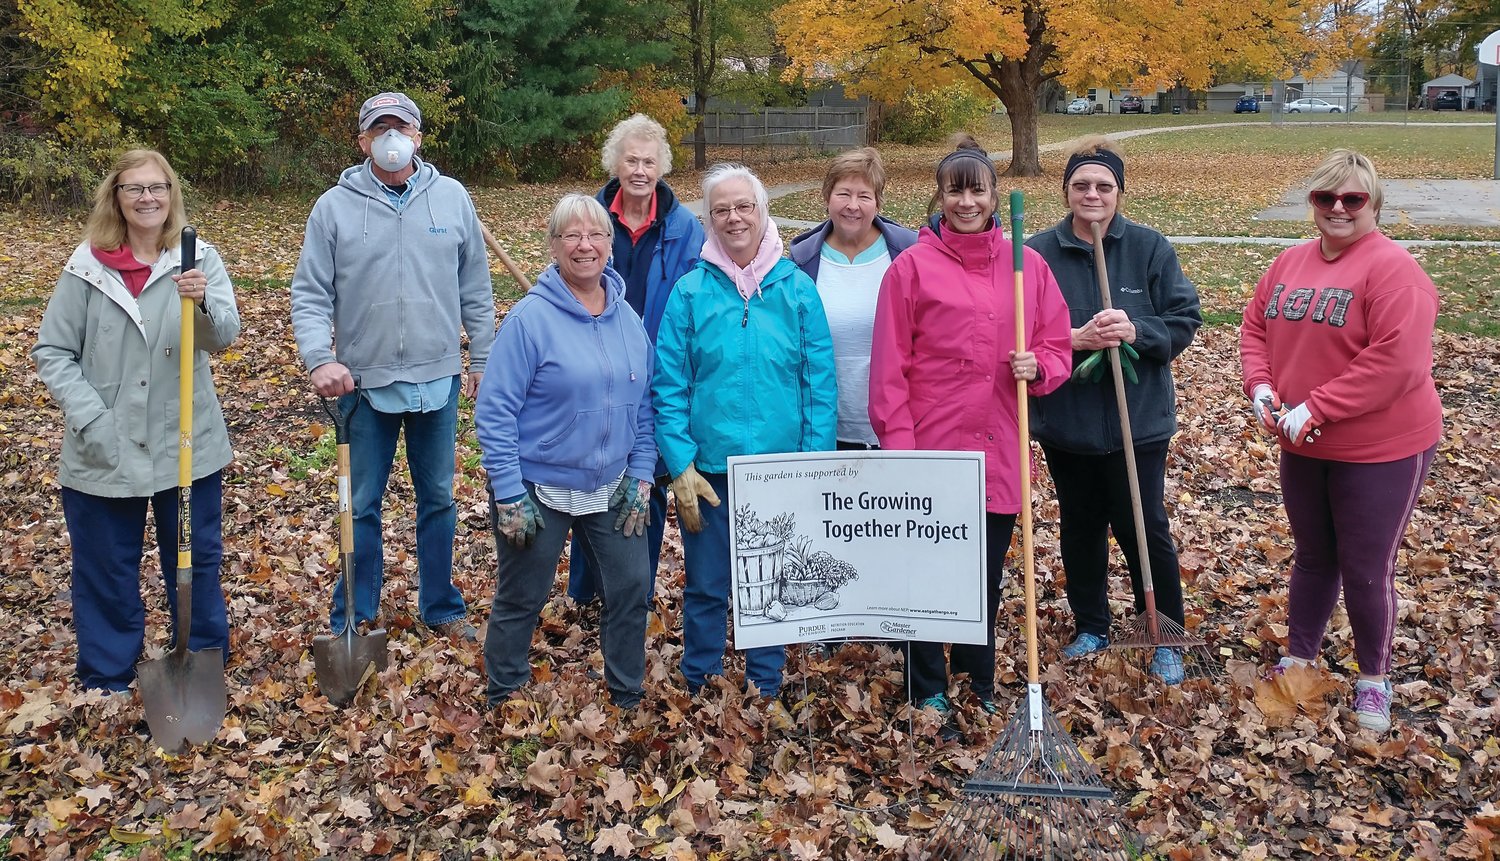 Master Gardeners and volunteers, from left, are Jerilyn Yerkes (former teacher at Nicholson and garden founder), Bryon Thada, Priscilla Zachary, Anita Arnold, Beth Griffin, Nancy Bowes, Marie Stocks, Esther Phefferle-Bundy and Andria Grady.